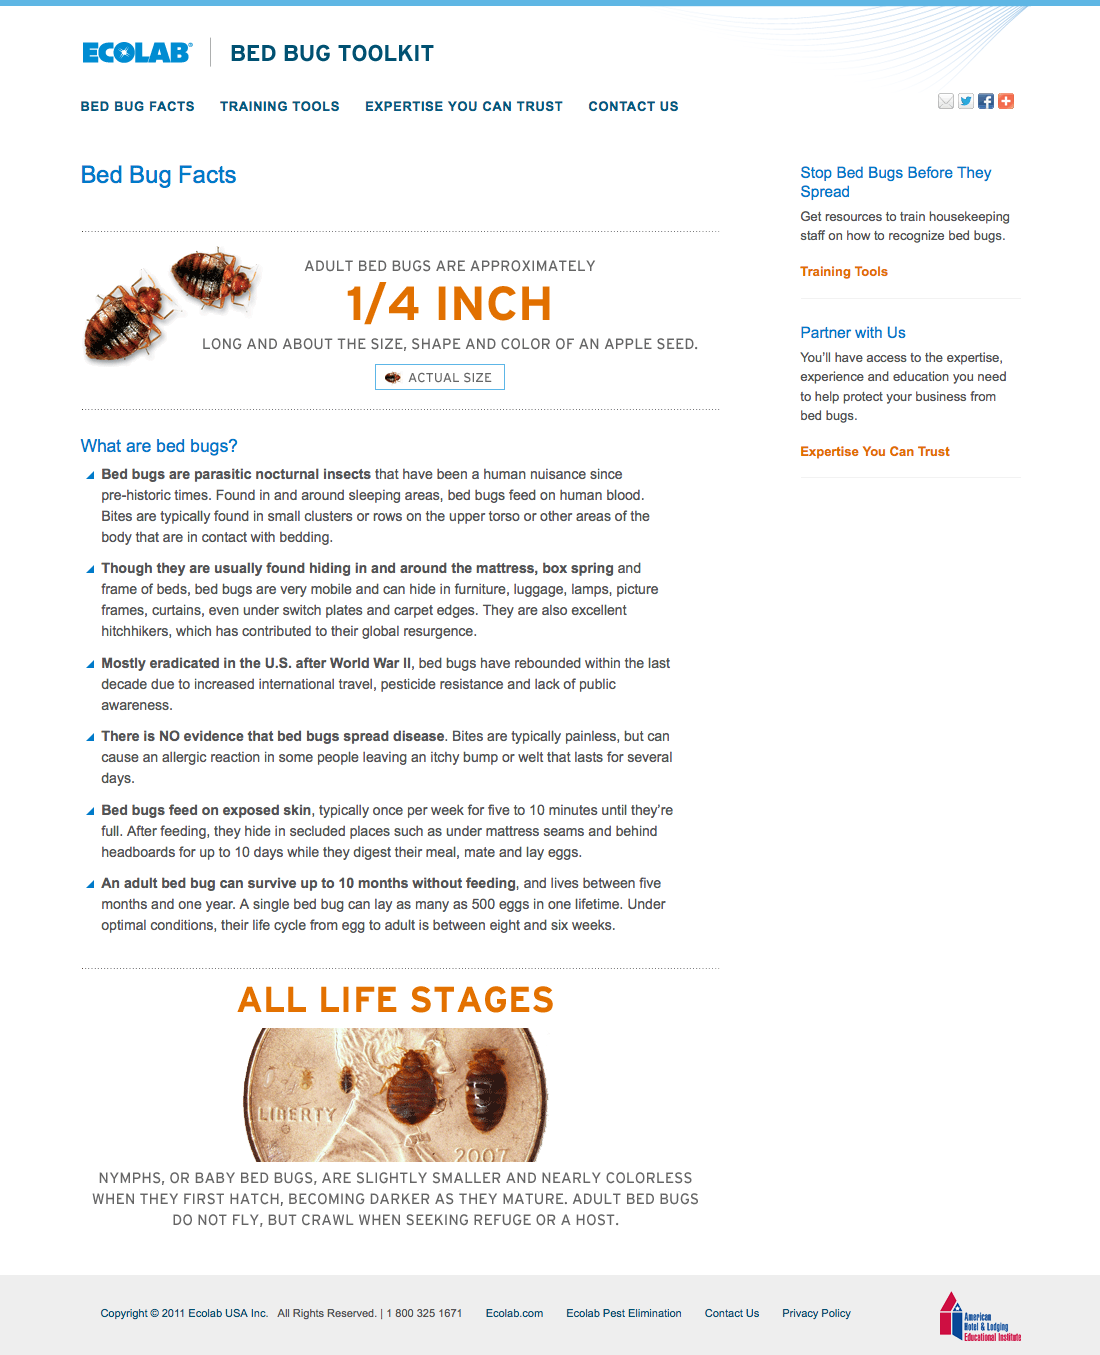 Bed Bug Toolkit-Facts